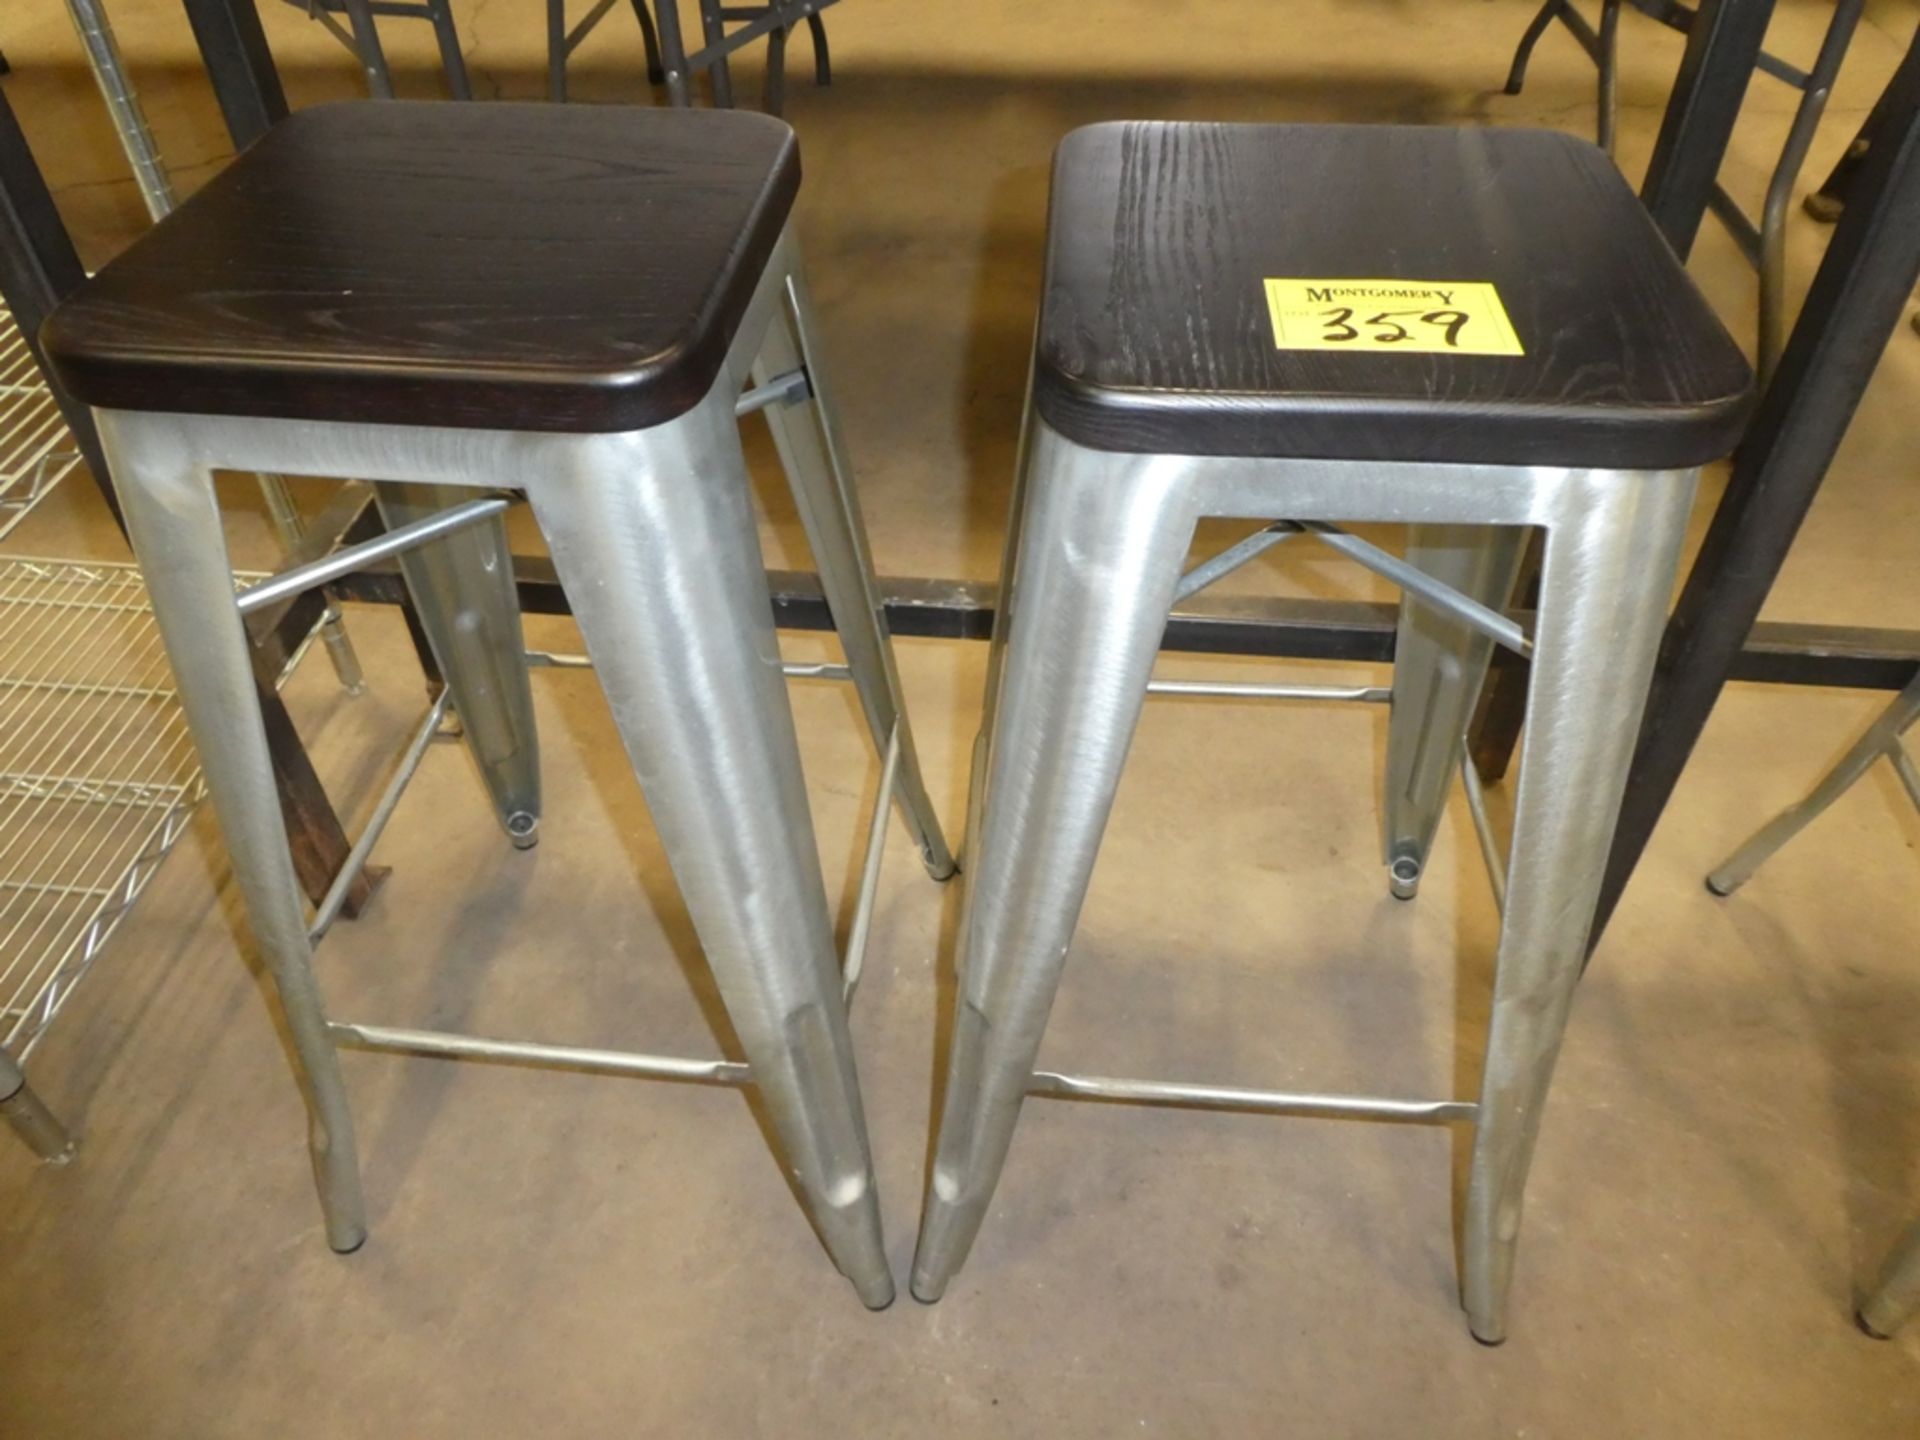 2-MOUNTAIN HOUSE STAINLESS STEEL BAR STOOLS